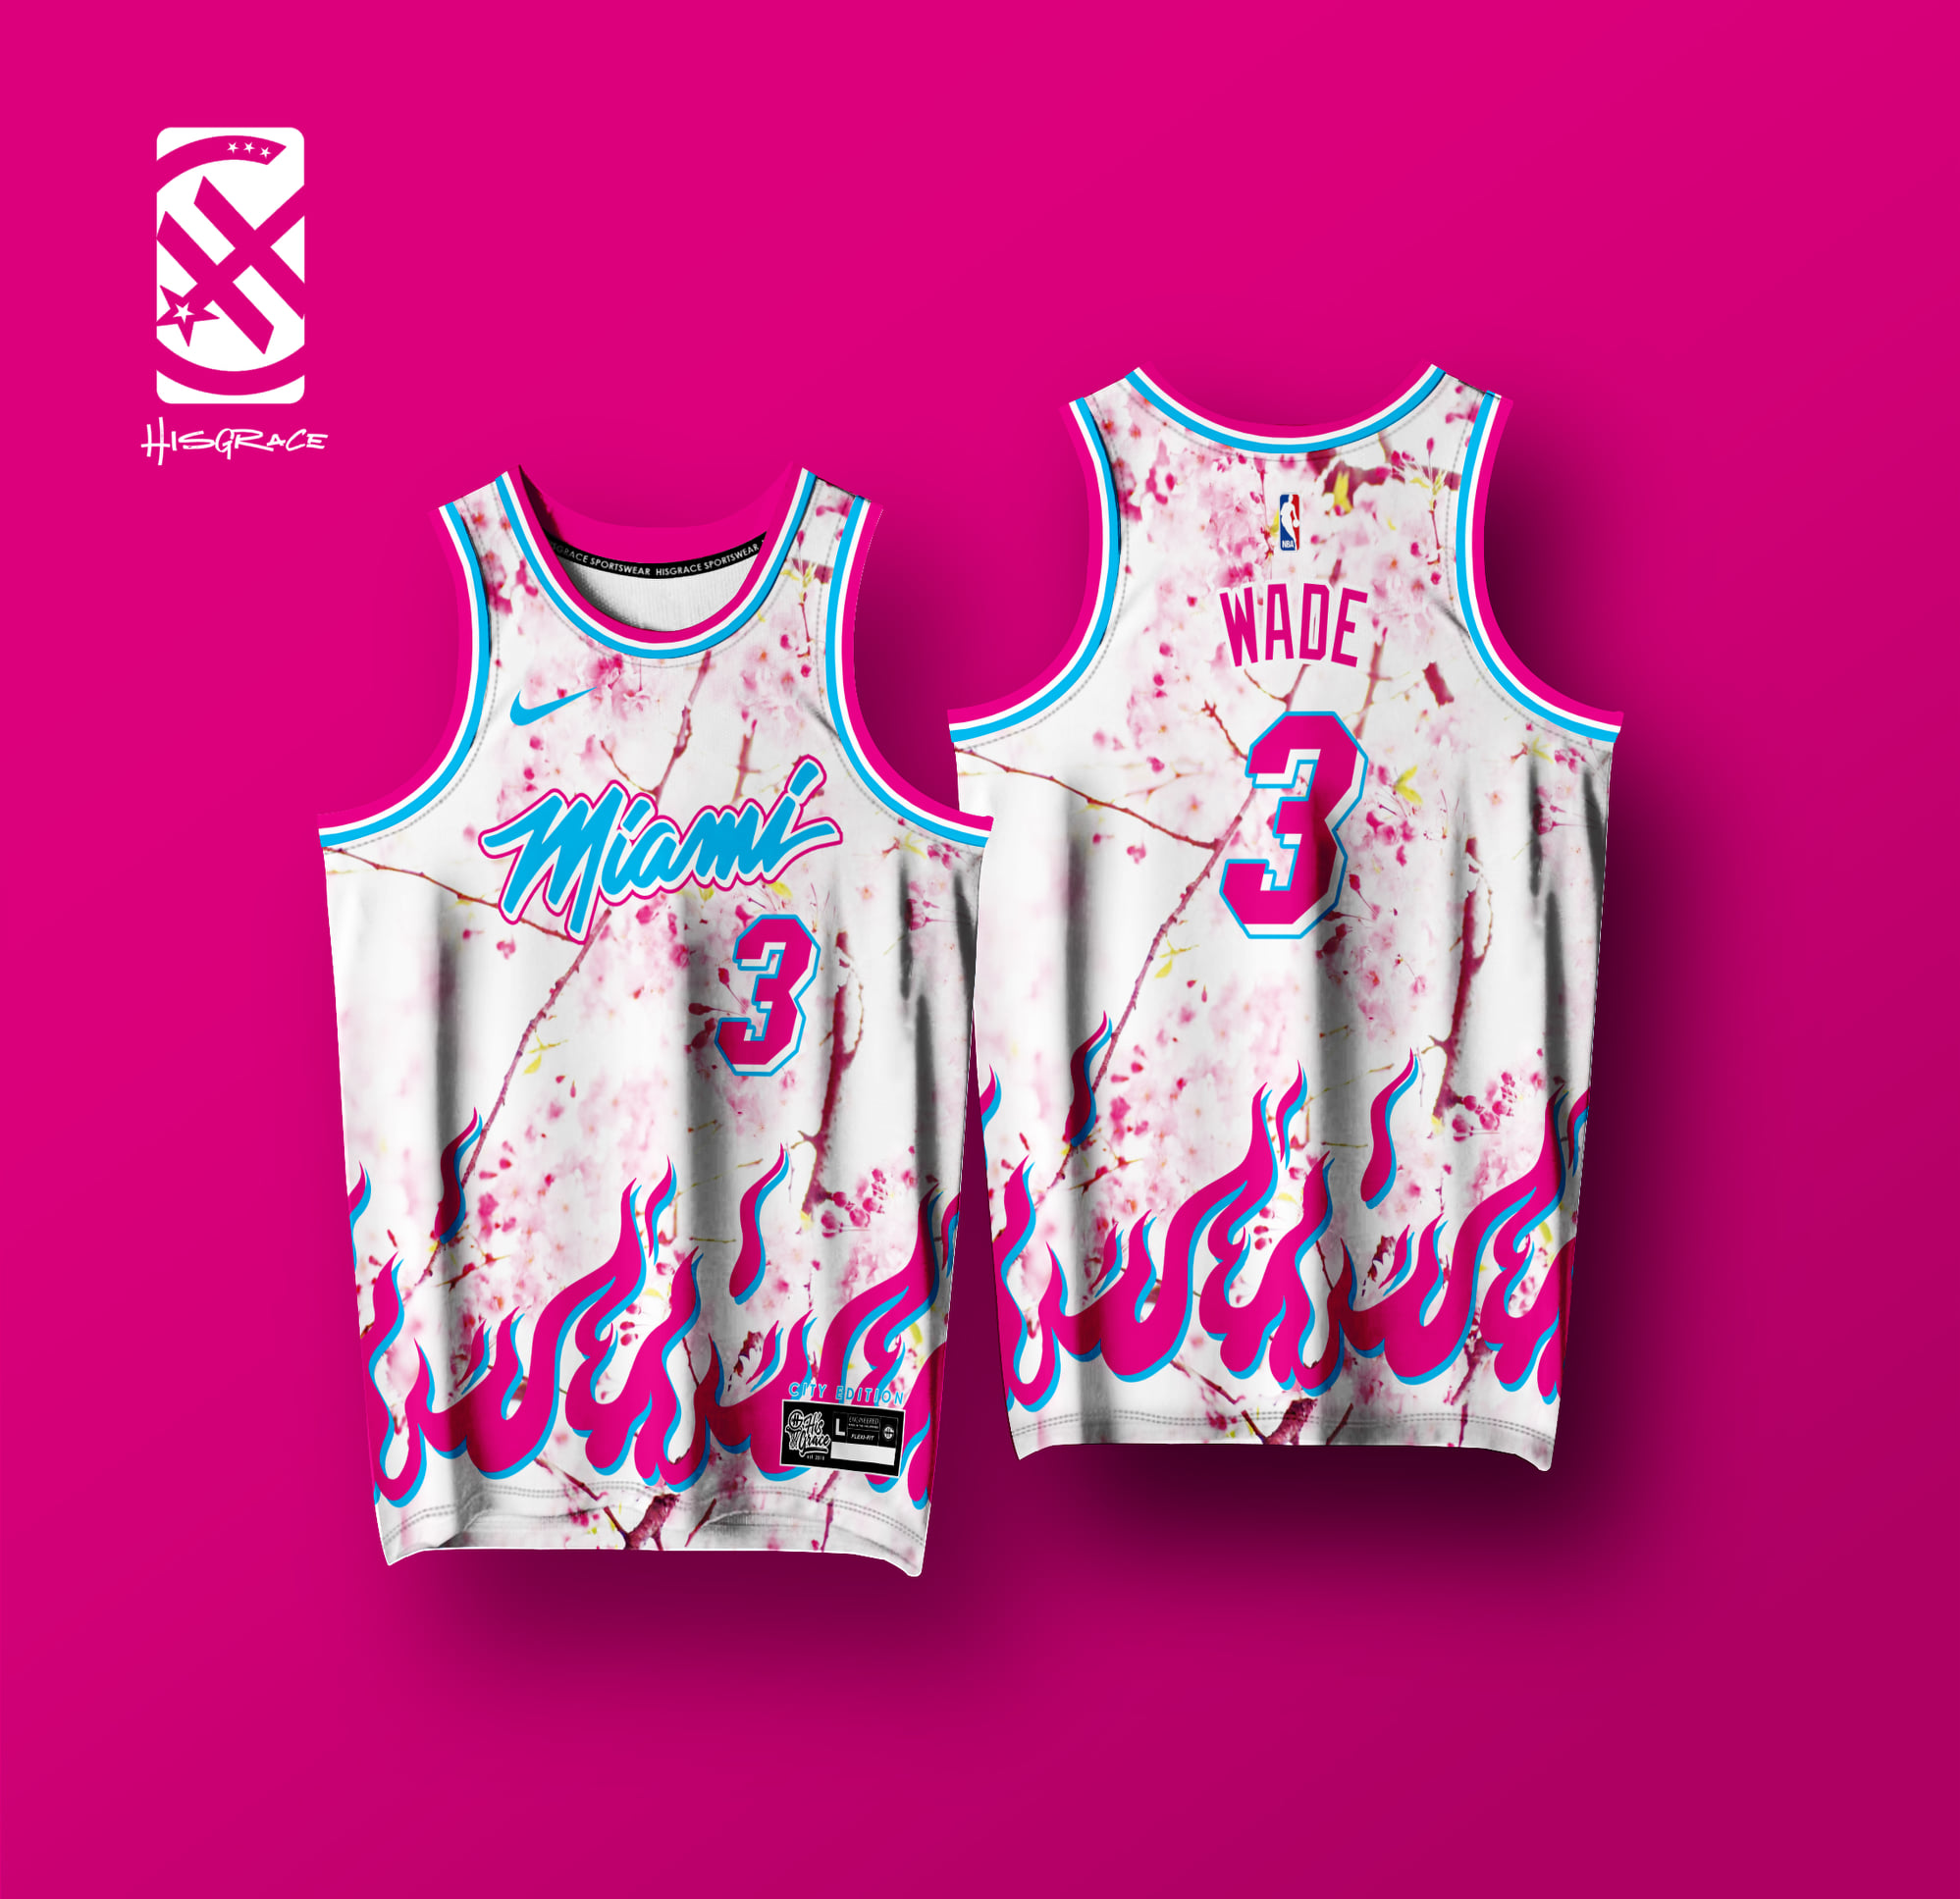 MIAMI HEAT BUTLER 2022 HG FINAL FOUR JERSEY FULL SUBLIMATION